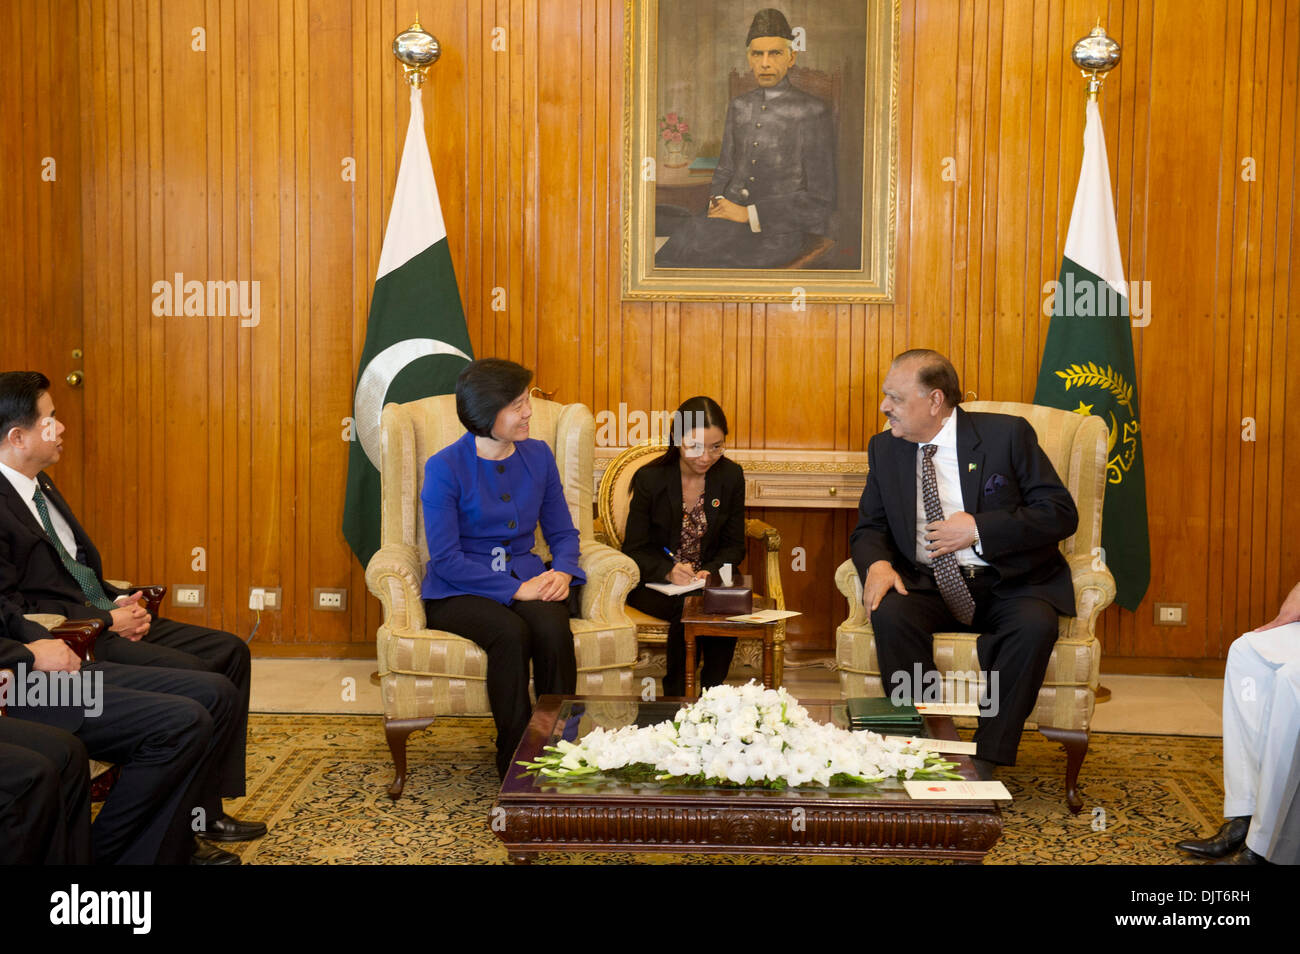 Islamabad, Pakistan. 30th Nov, 2013. Shen Yueyue (3rd R), vice chairwoman of the Standing Committee of China's National People's Congress (NPC), meets with Pakistani President Mamnoon Hussain (1st R) in Islamabad, Pakistan, on Nov. 29, 2013. © Huang Zongzhi/Xinhua/Alamy Live News Stock Photo